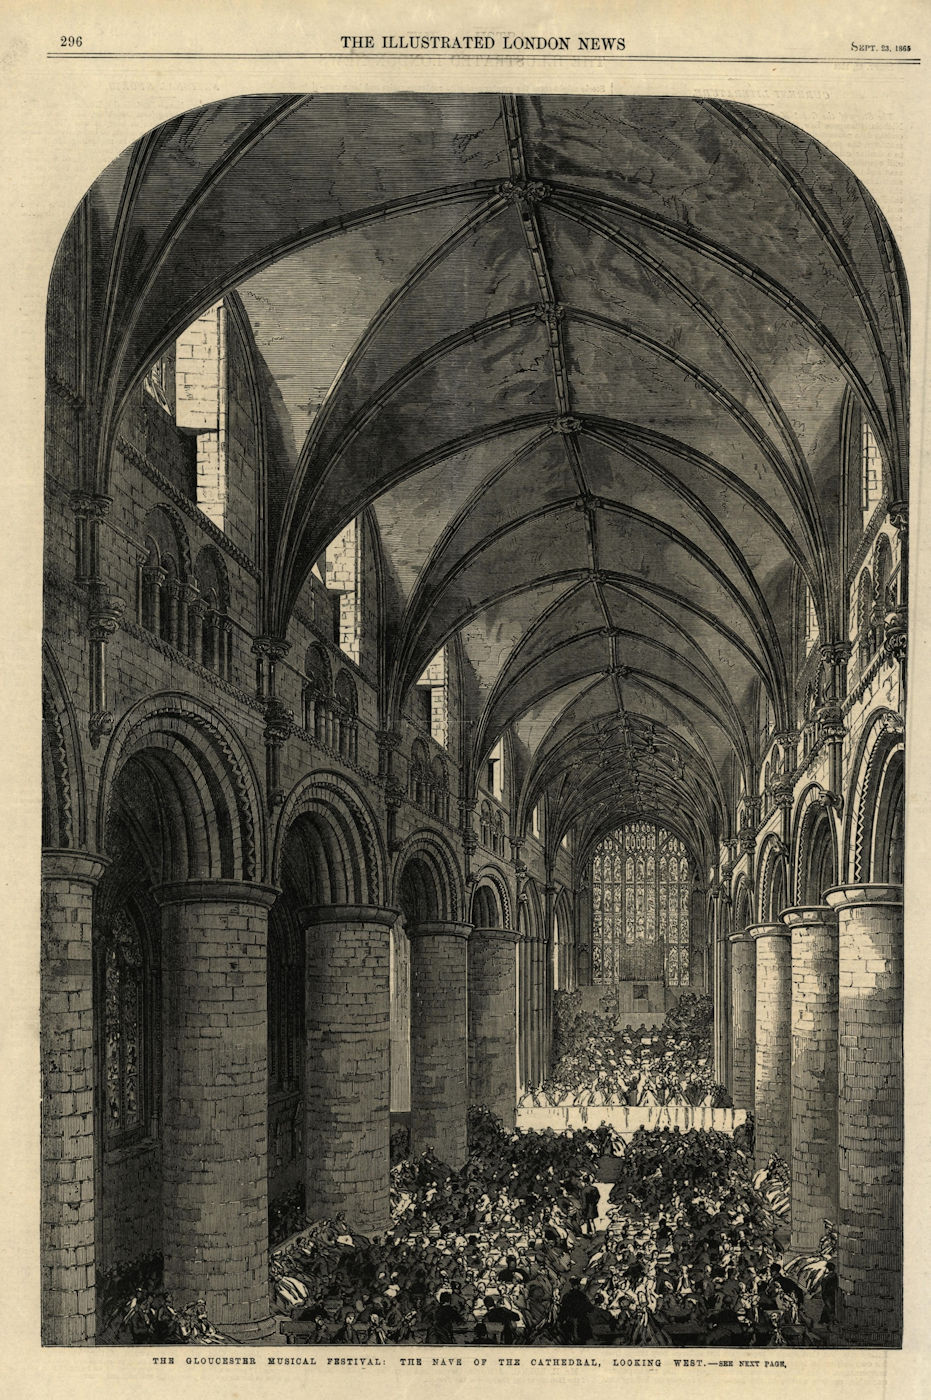 The Gloucester Musical Festival: the nave of the cathedral, looking west 1865